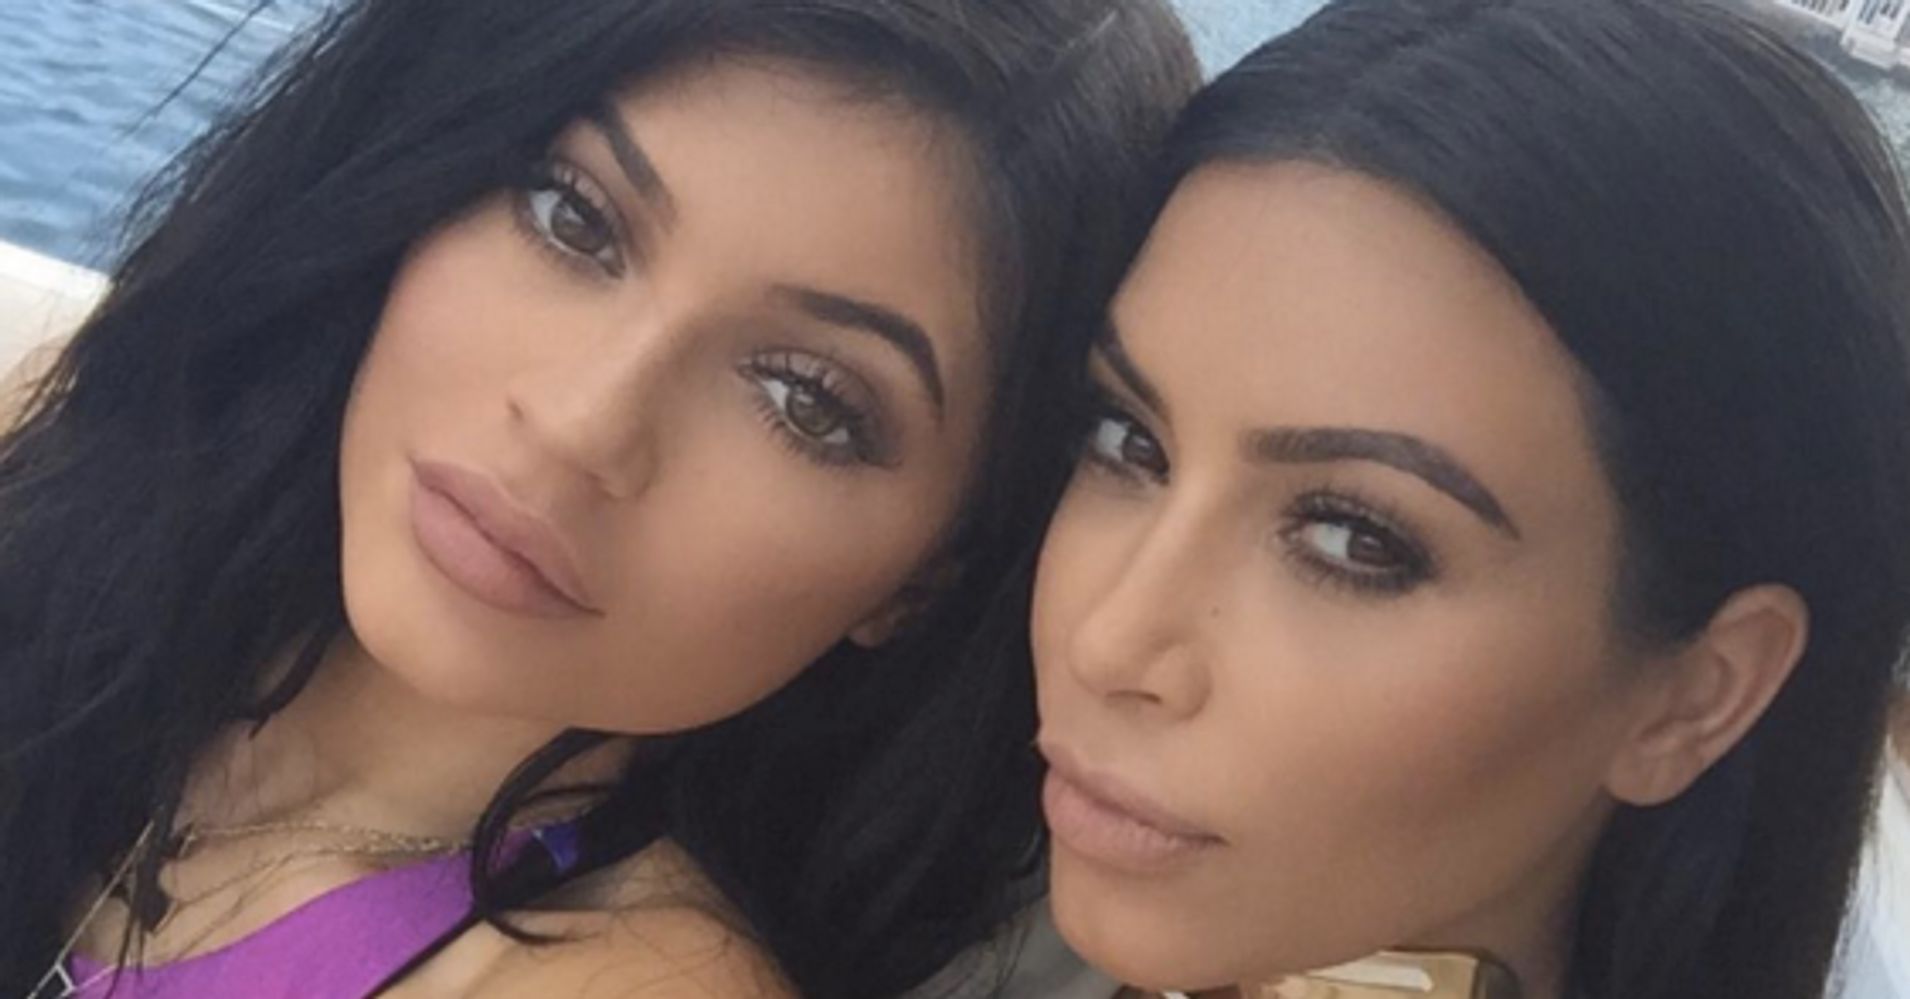 More People Are Getting Plastic Surgery To Look Like The Kardashians Huffpost